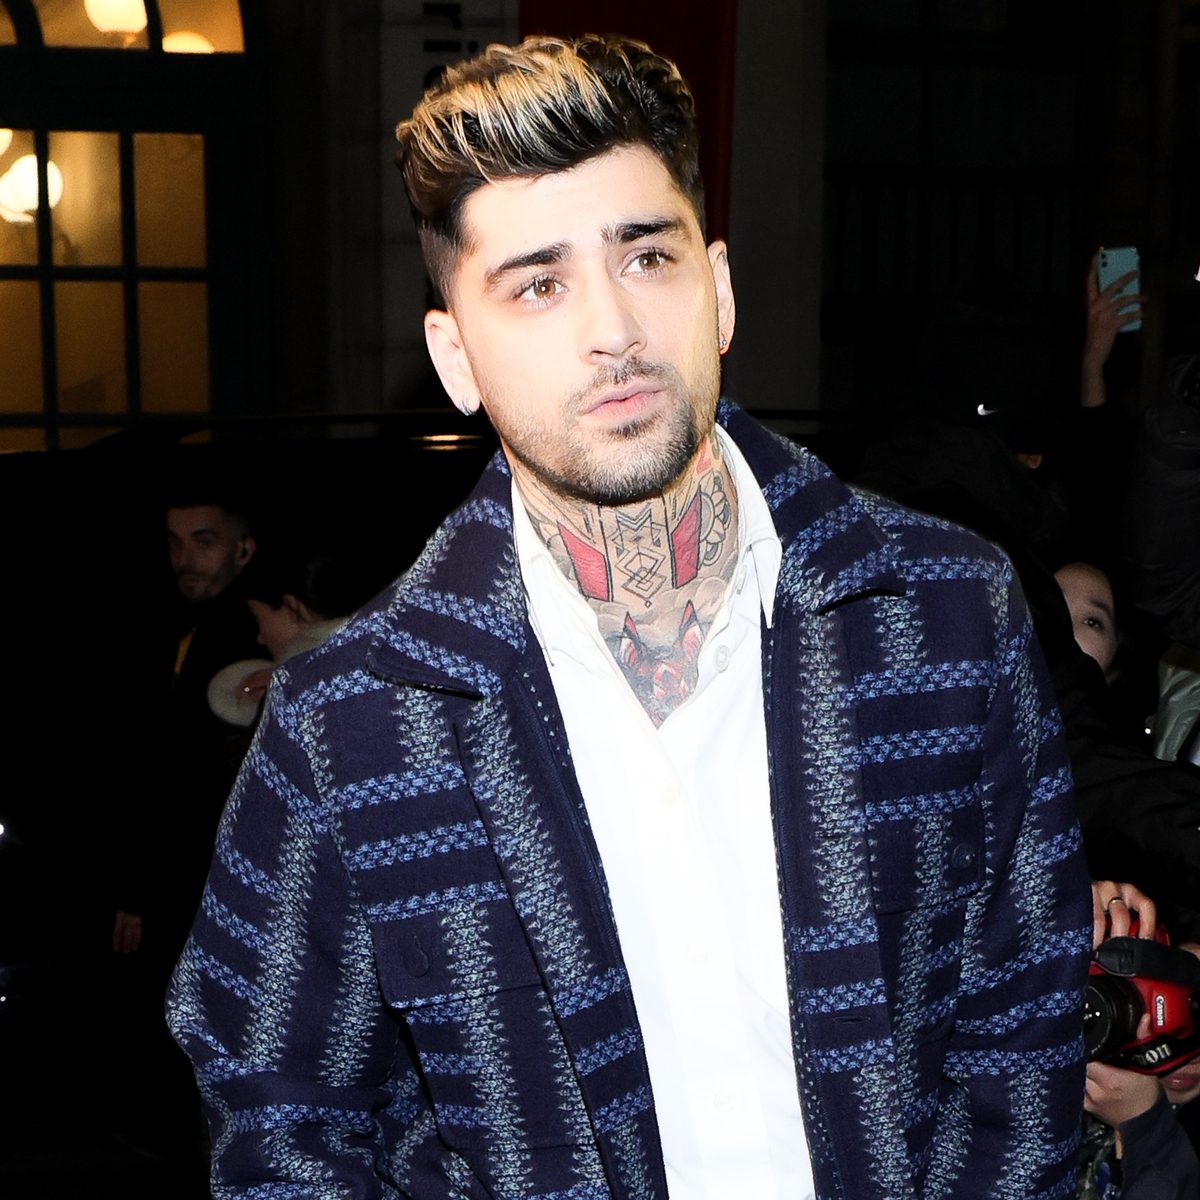 Image for article Zayn Maliks Foot Appears to Get Run Over by Car During Rare Public Appearance  E! Online  E! NEWS